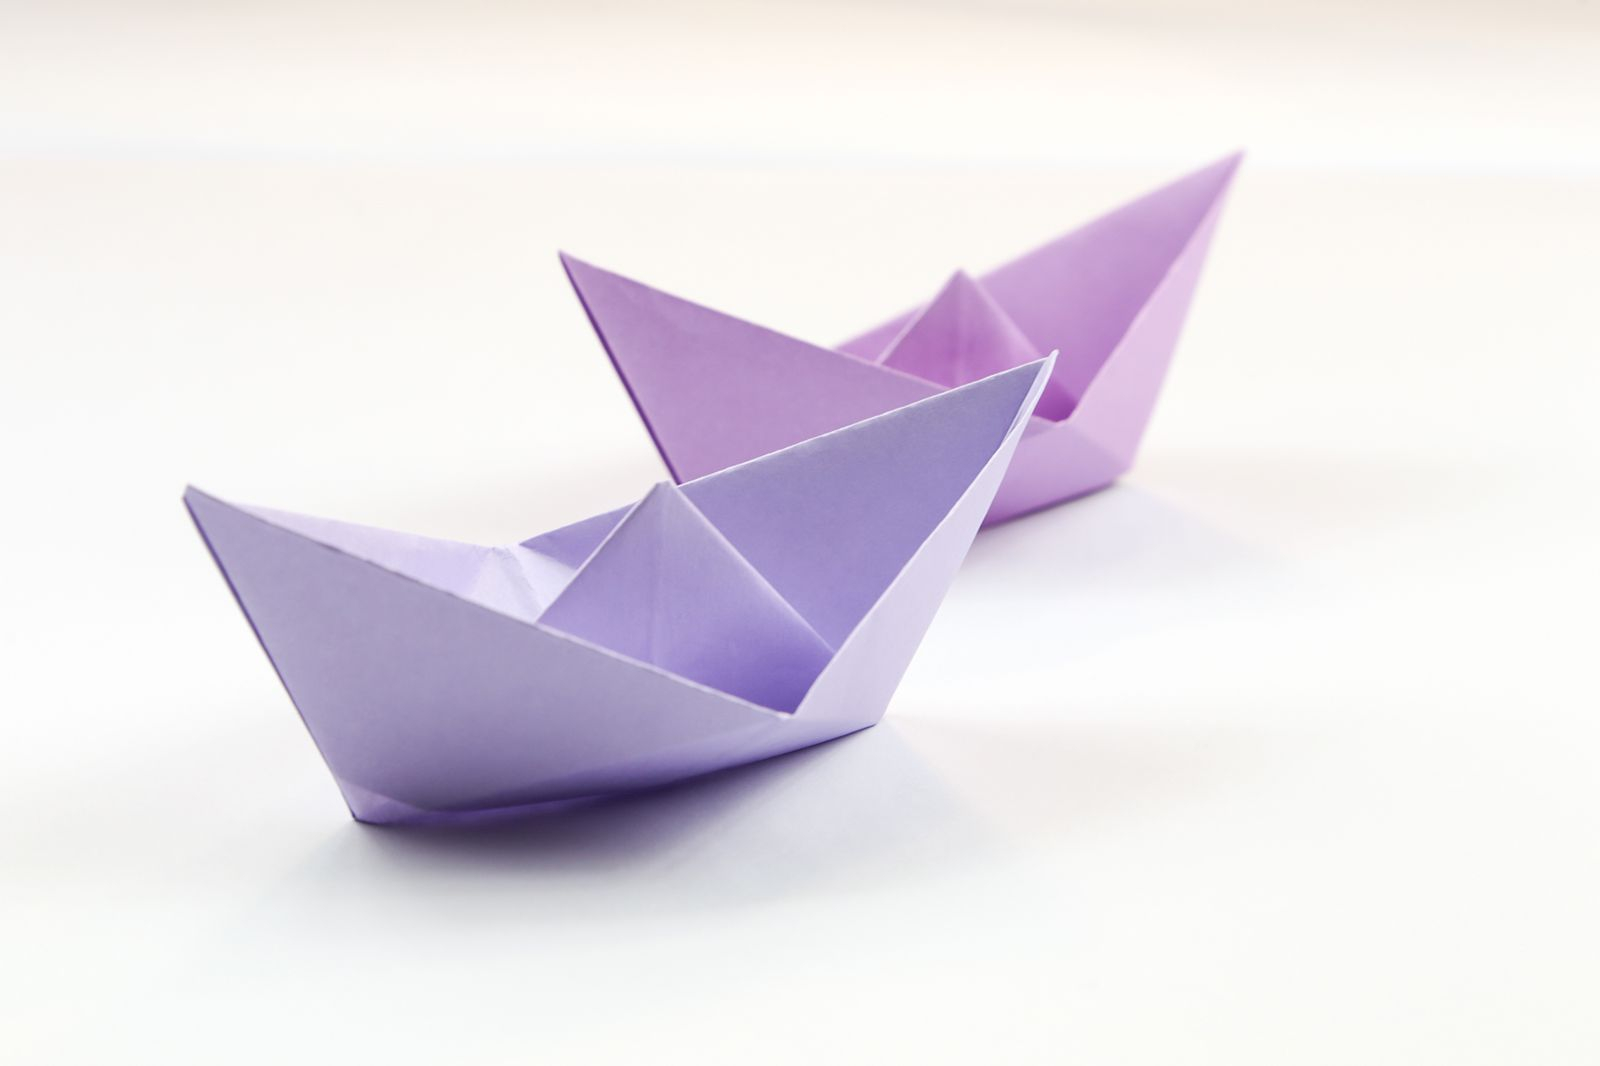 How To Make An Origami Boat Easy How To Make An Easy Origami Boat